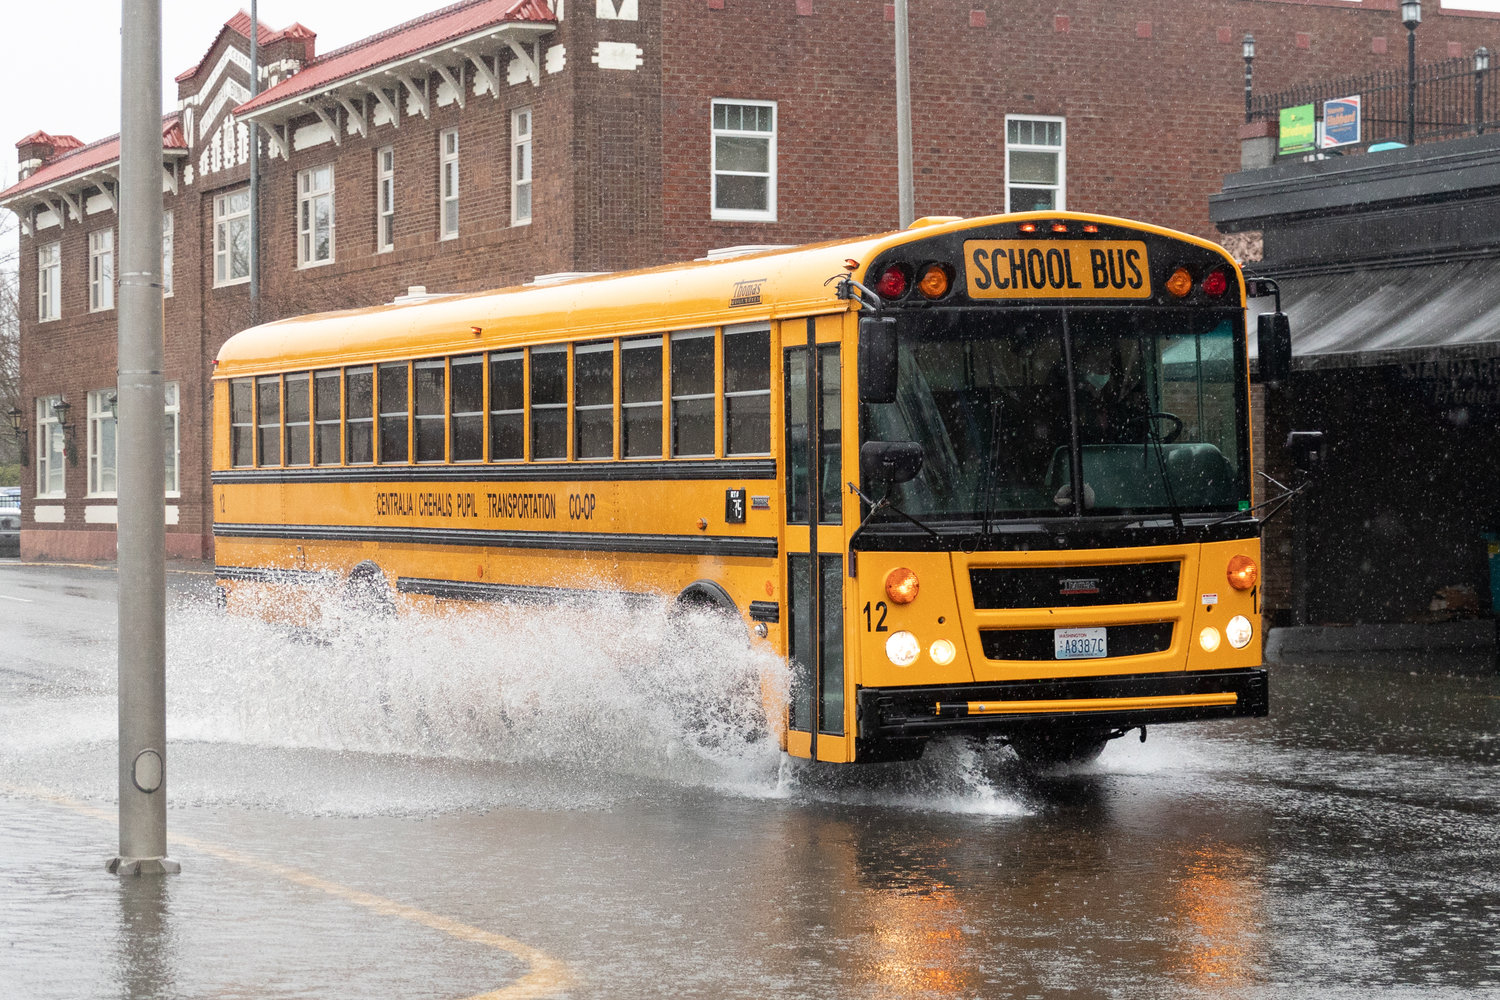 A Centralia school bus traverses flooded roads after an early release 1 p.m. in Downtown Centralia.